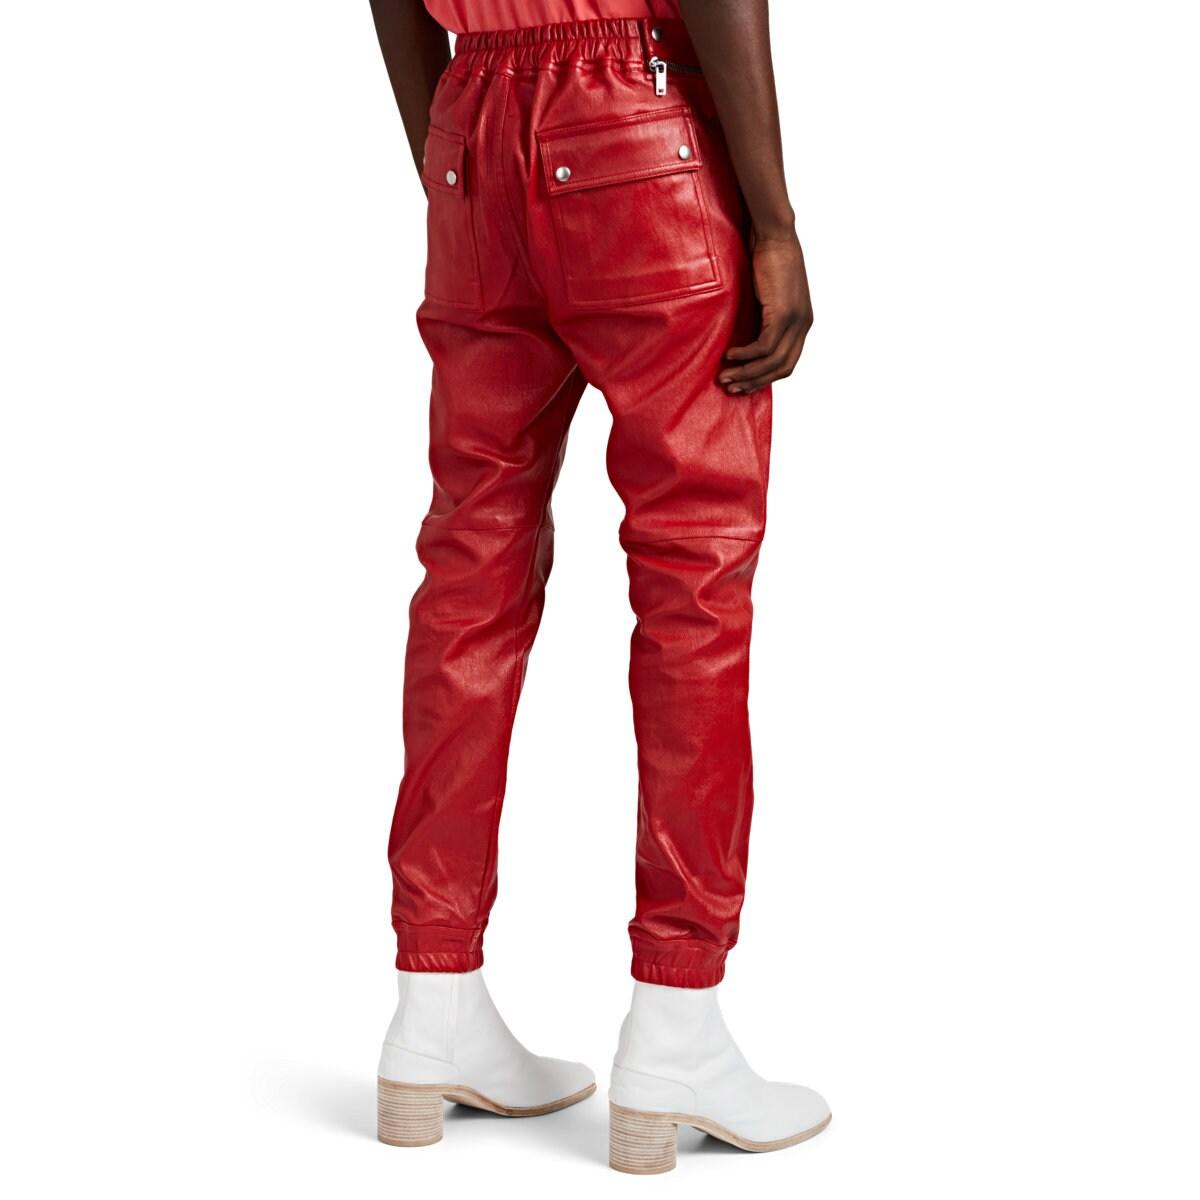 Rick Owens Leather Lambskin Jogger Pants in Red for Men - Lyst